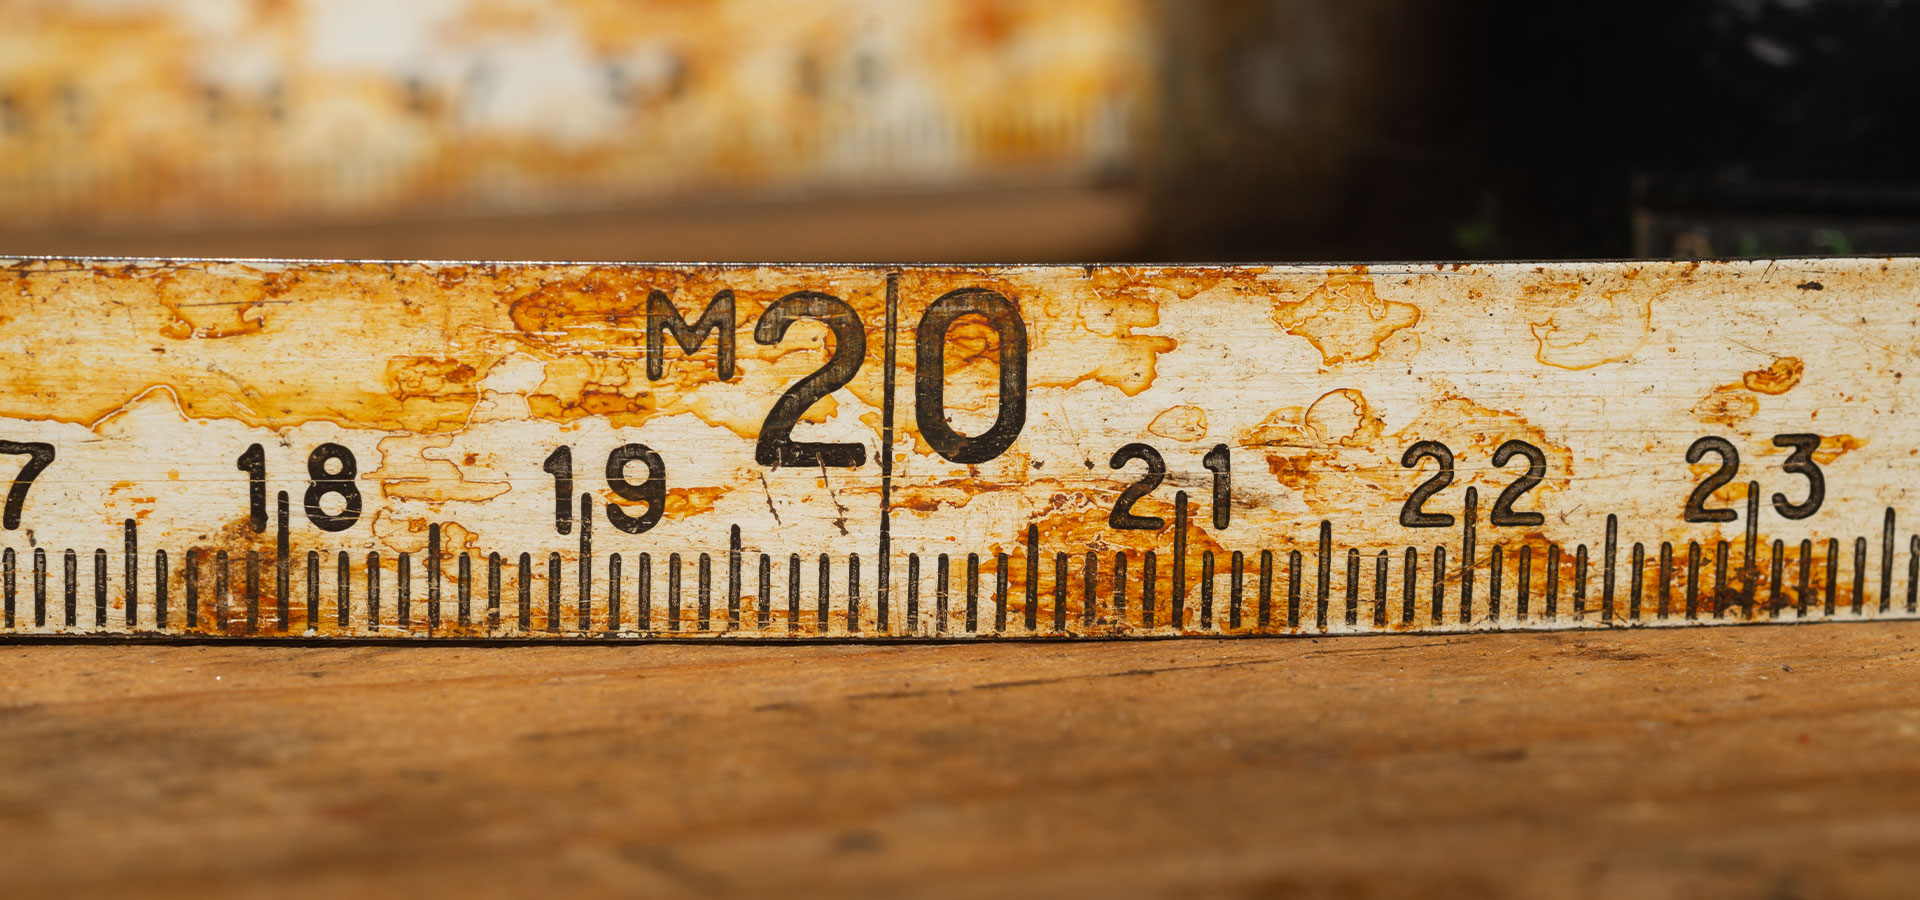 Tale of the tool: A history of the tape measure